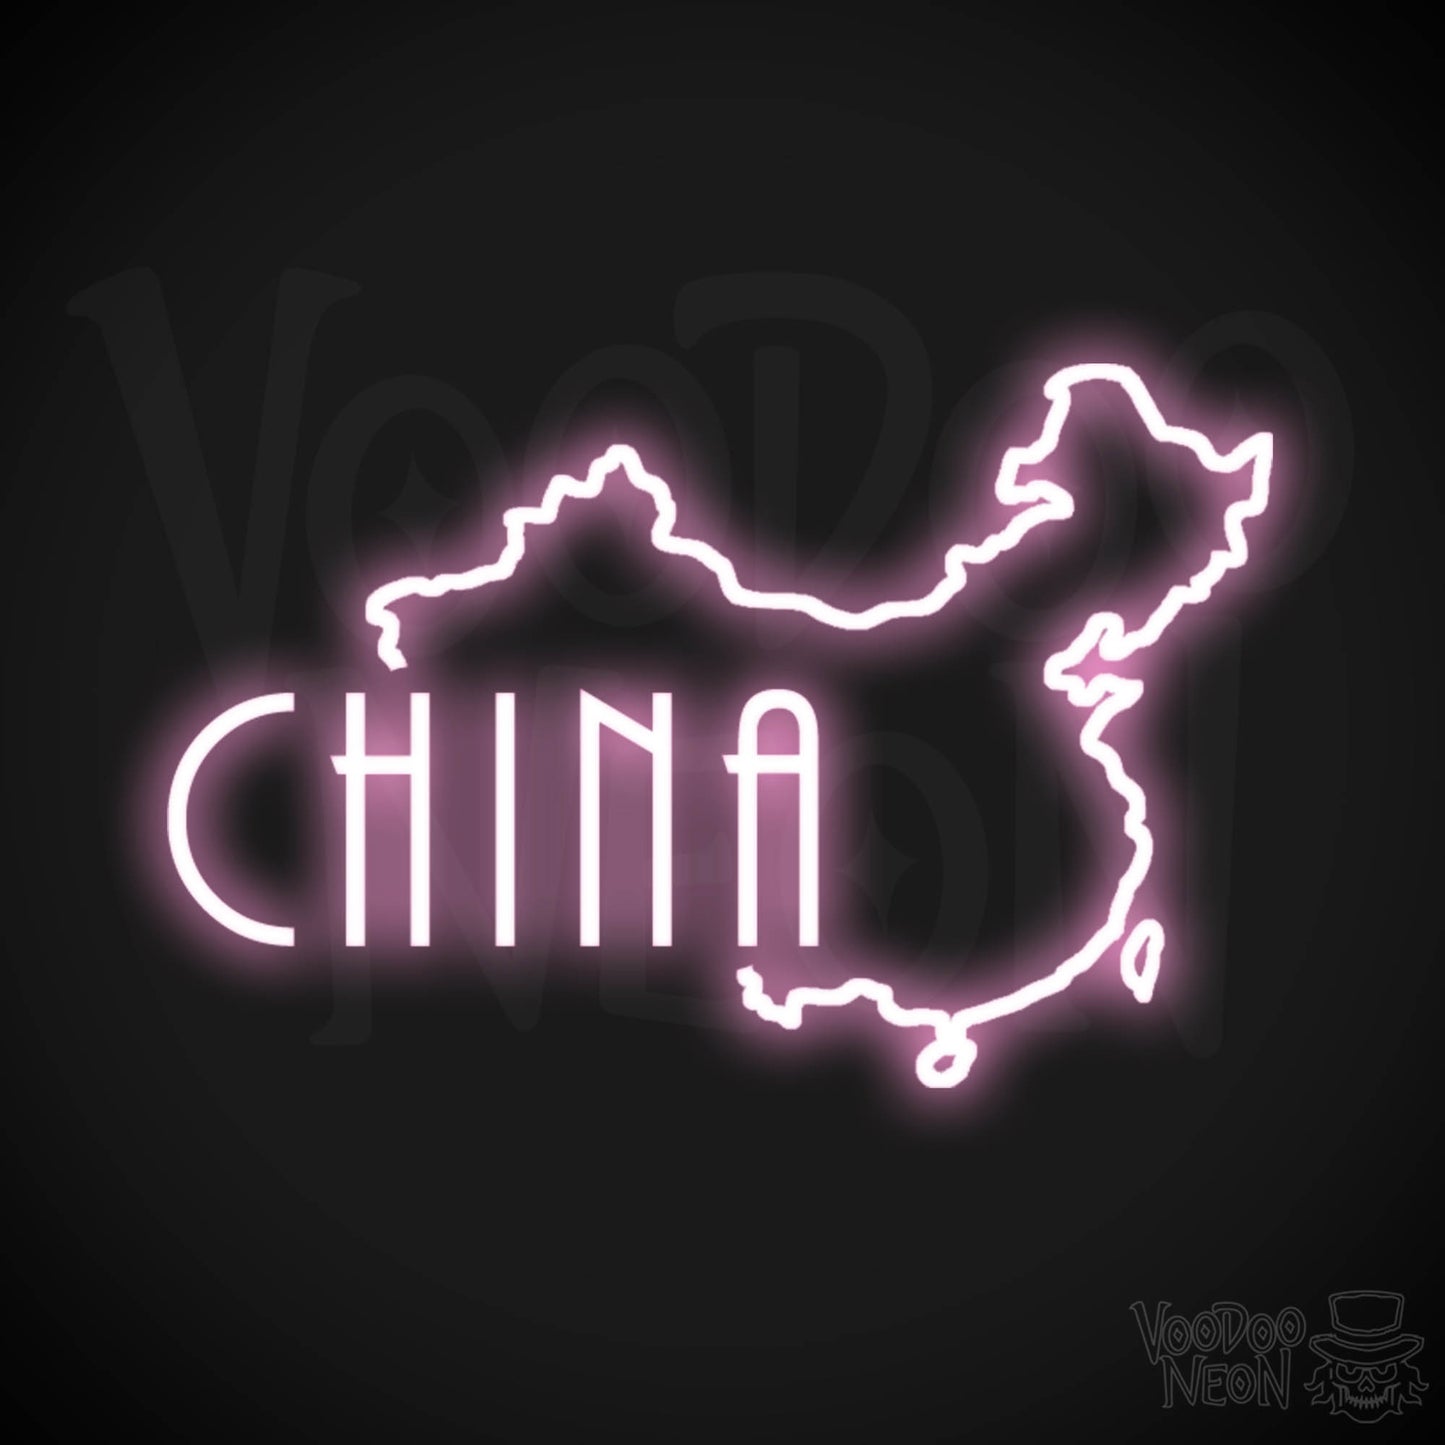 China Neon Sign - Neon China Sign - LED Sign - Color Light Pink